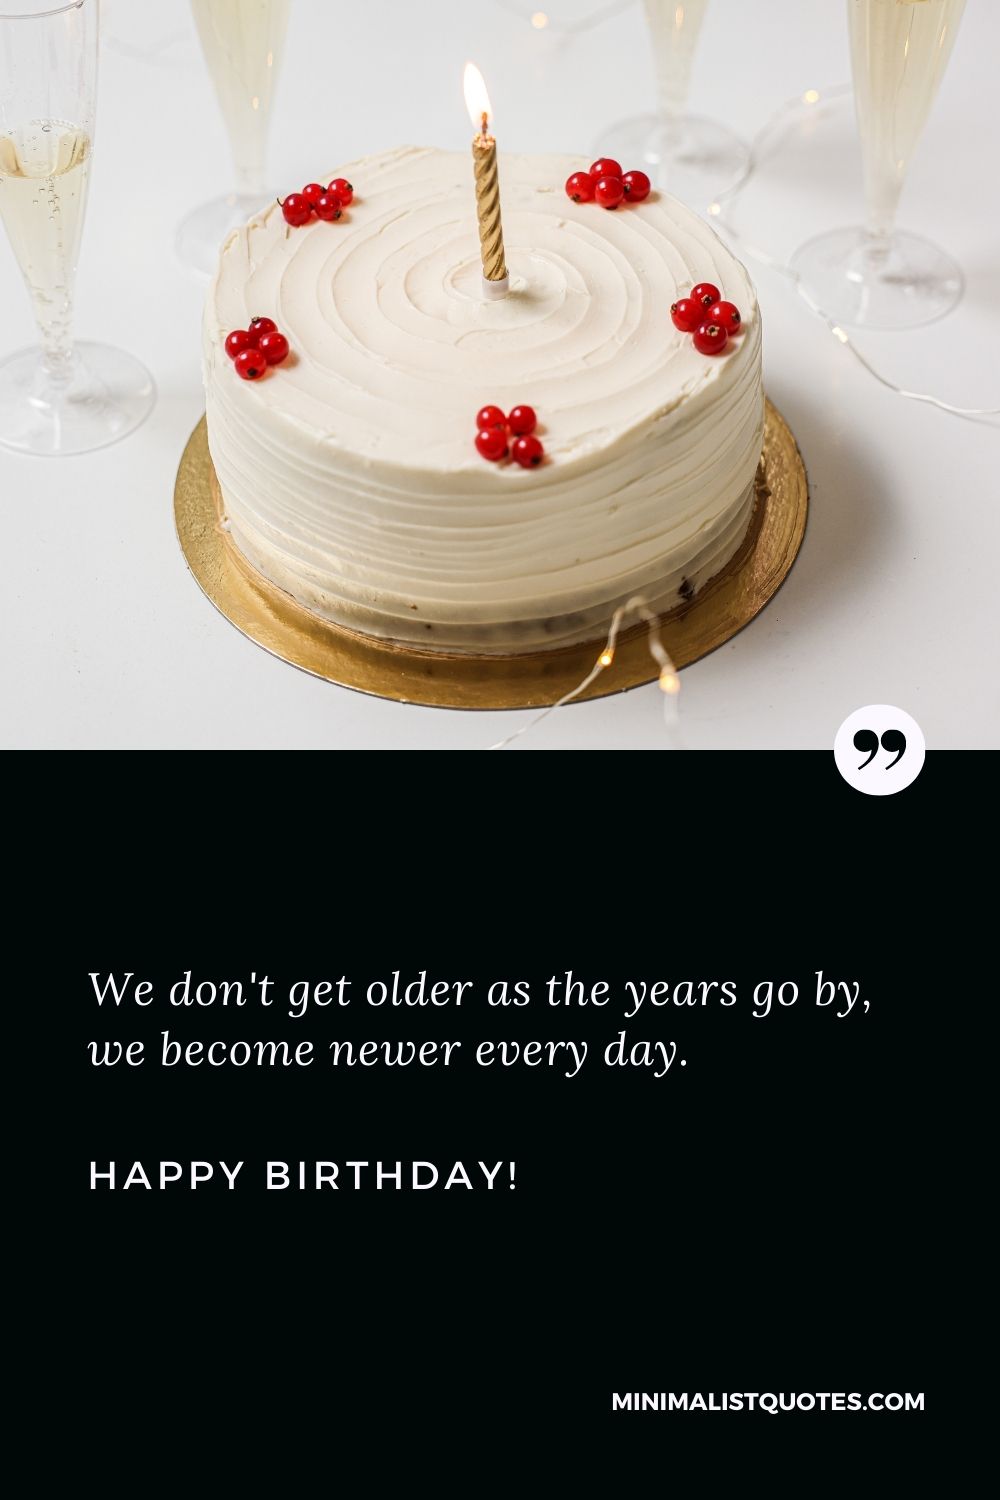 Happy birthday status: We don't get older as the years go by, we become newer every day. Happy Birthday!